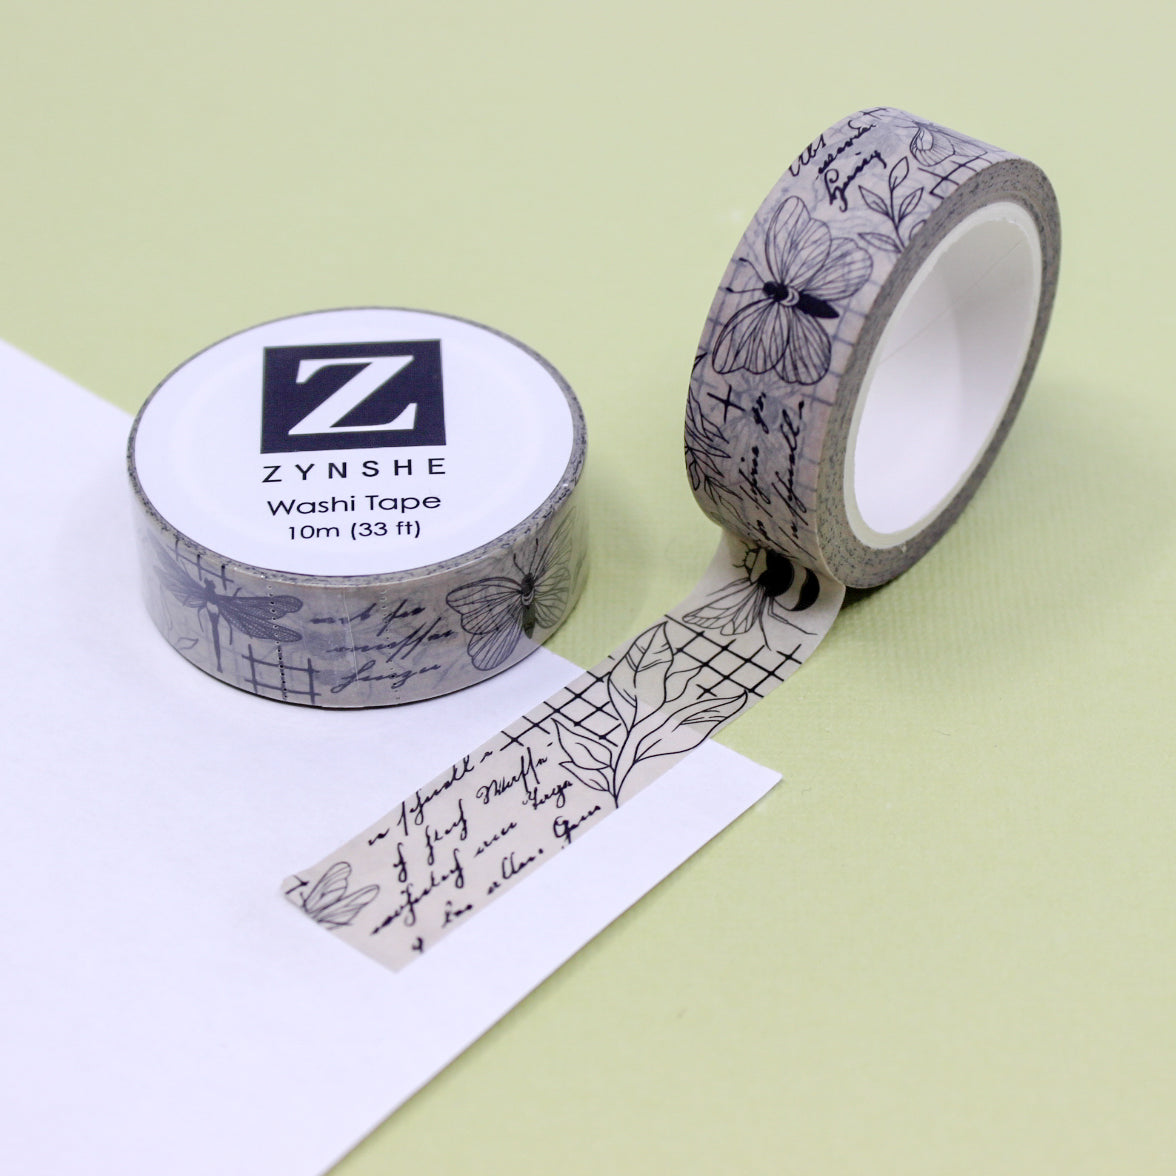  Let your imagination take flight as you adorn your creations with the graceful allure of butterflies and moths using our Black and Grey Vintage Botany Washi Tape. This washi tape features vintage-inspired botanical illustrations of butterflies and moths. This tape is sold at BBB Supplies Craft Shop.